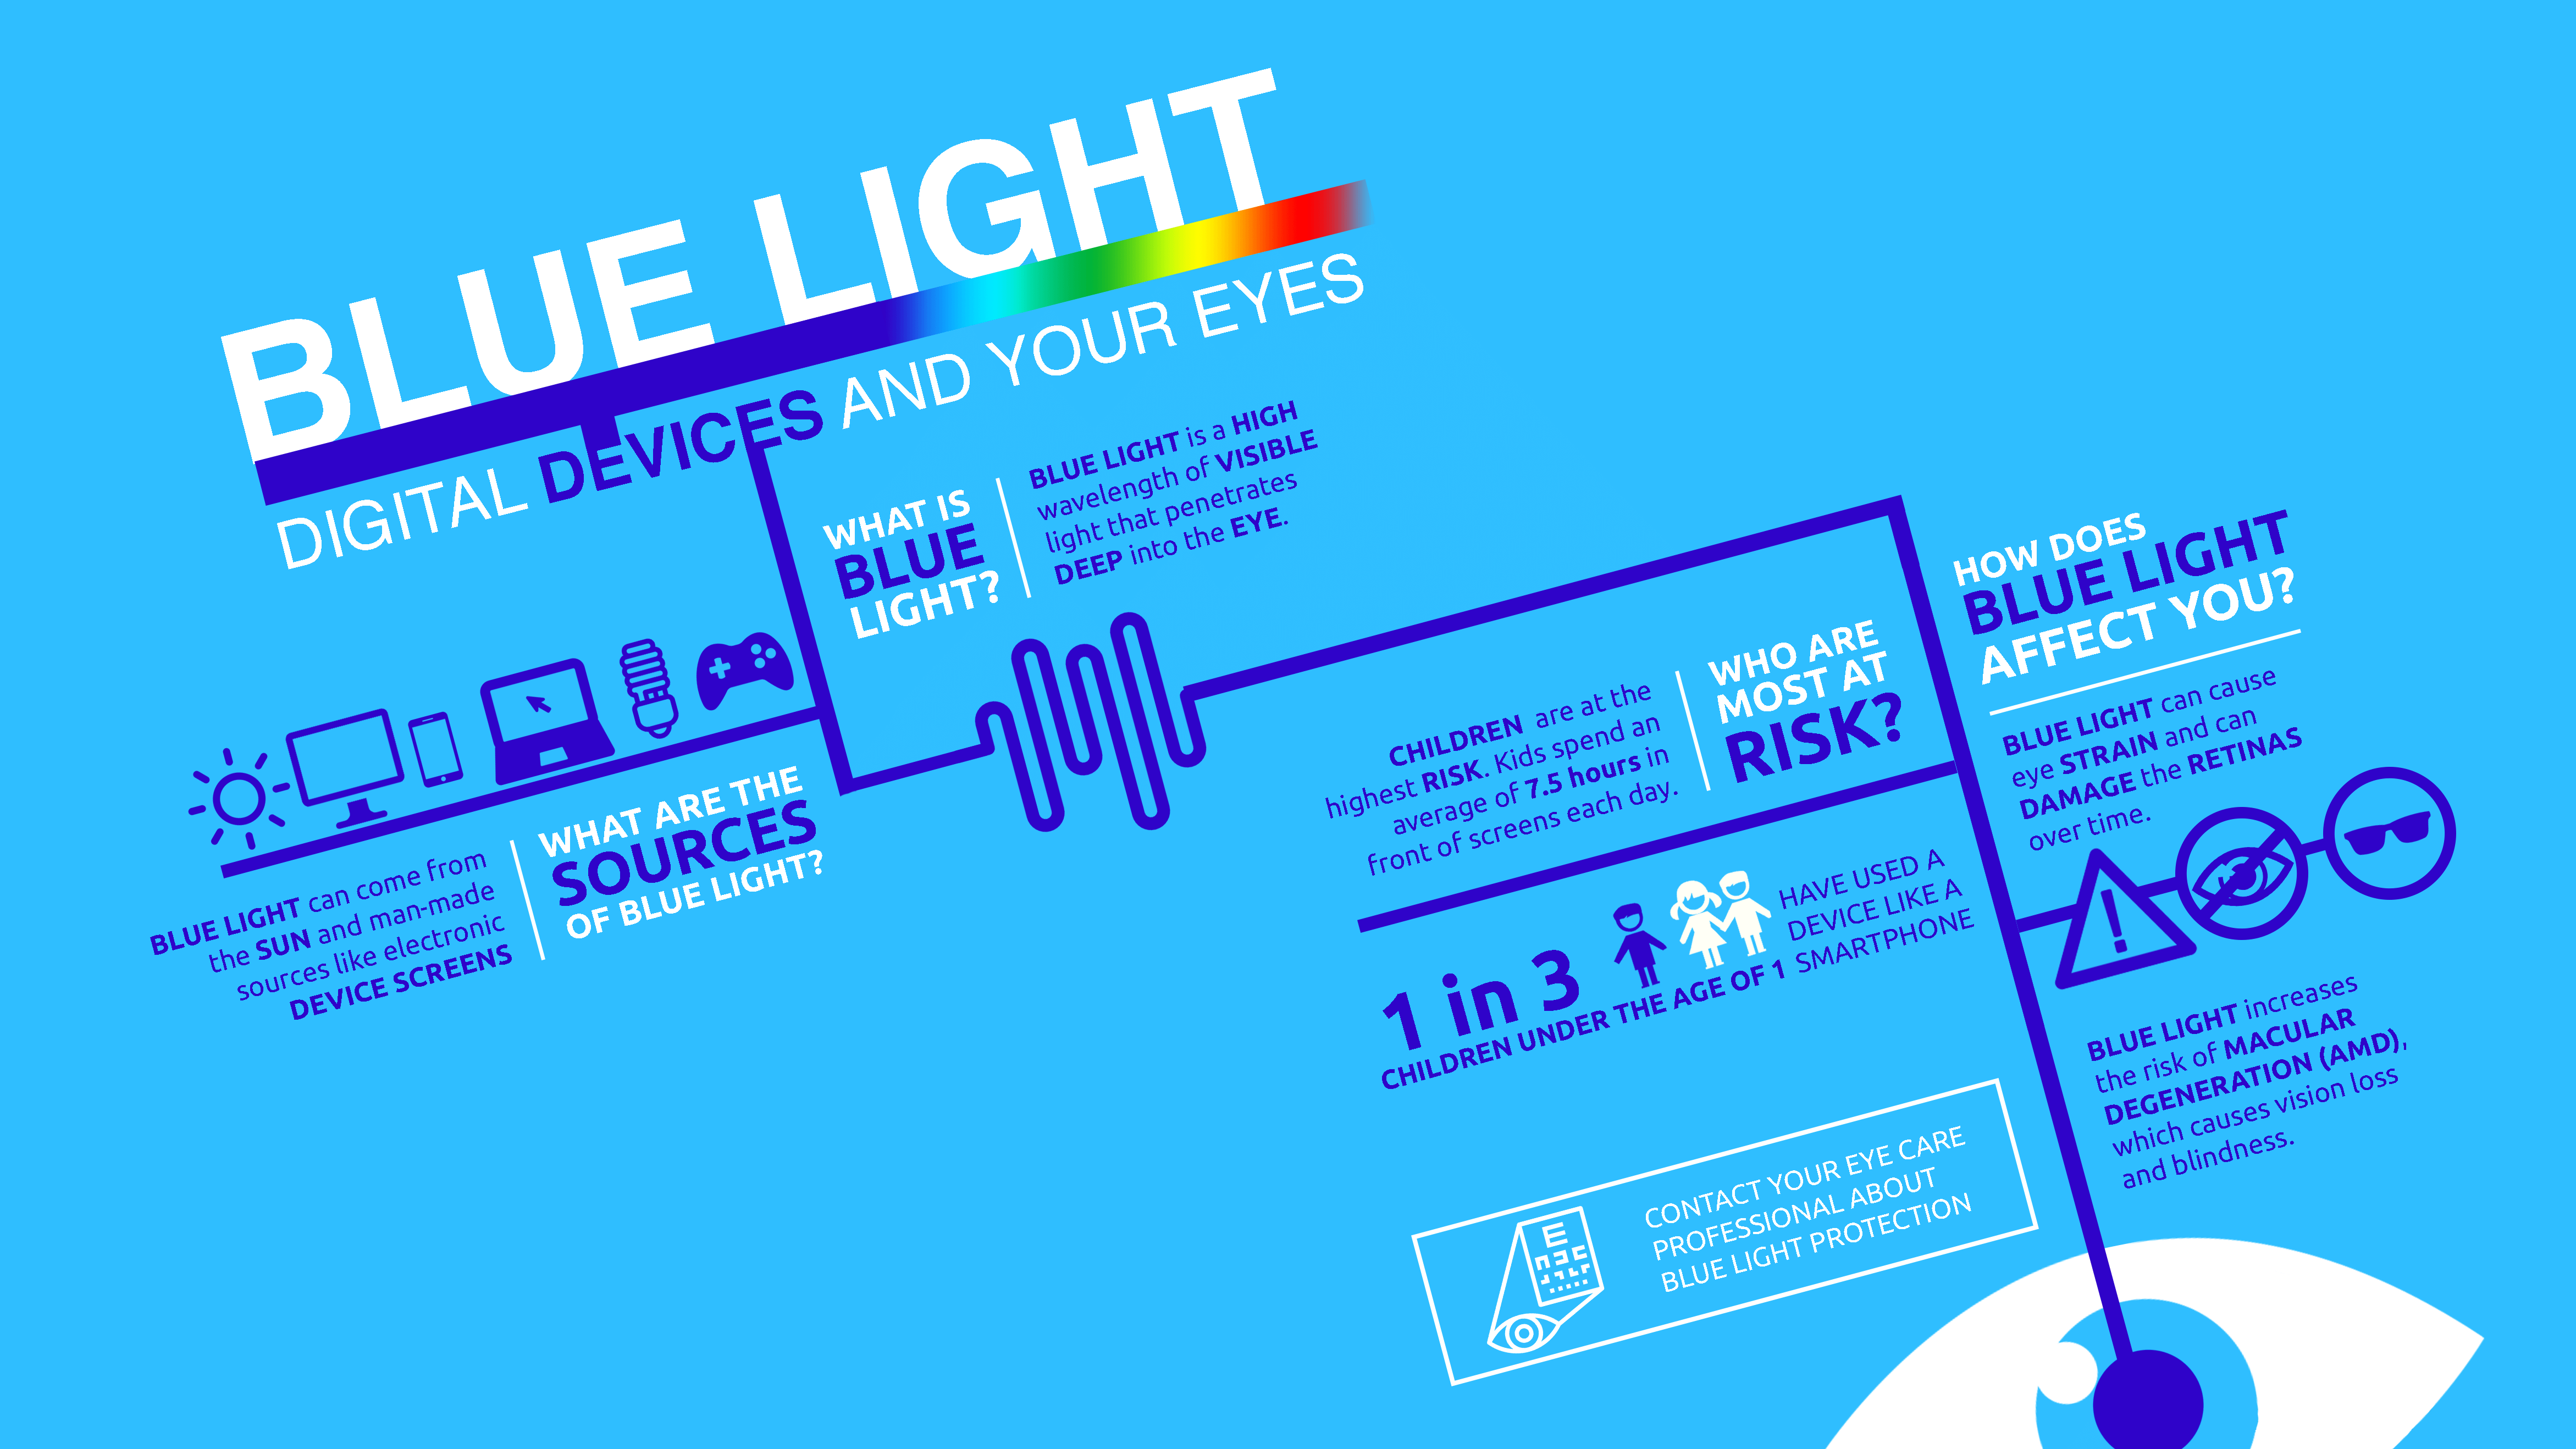 Where Does Blue Light Come From?